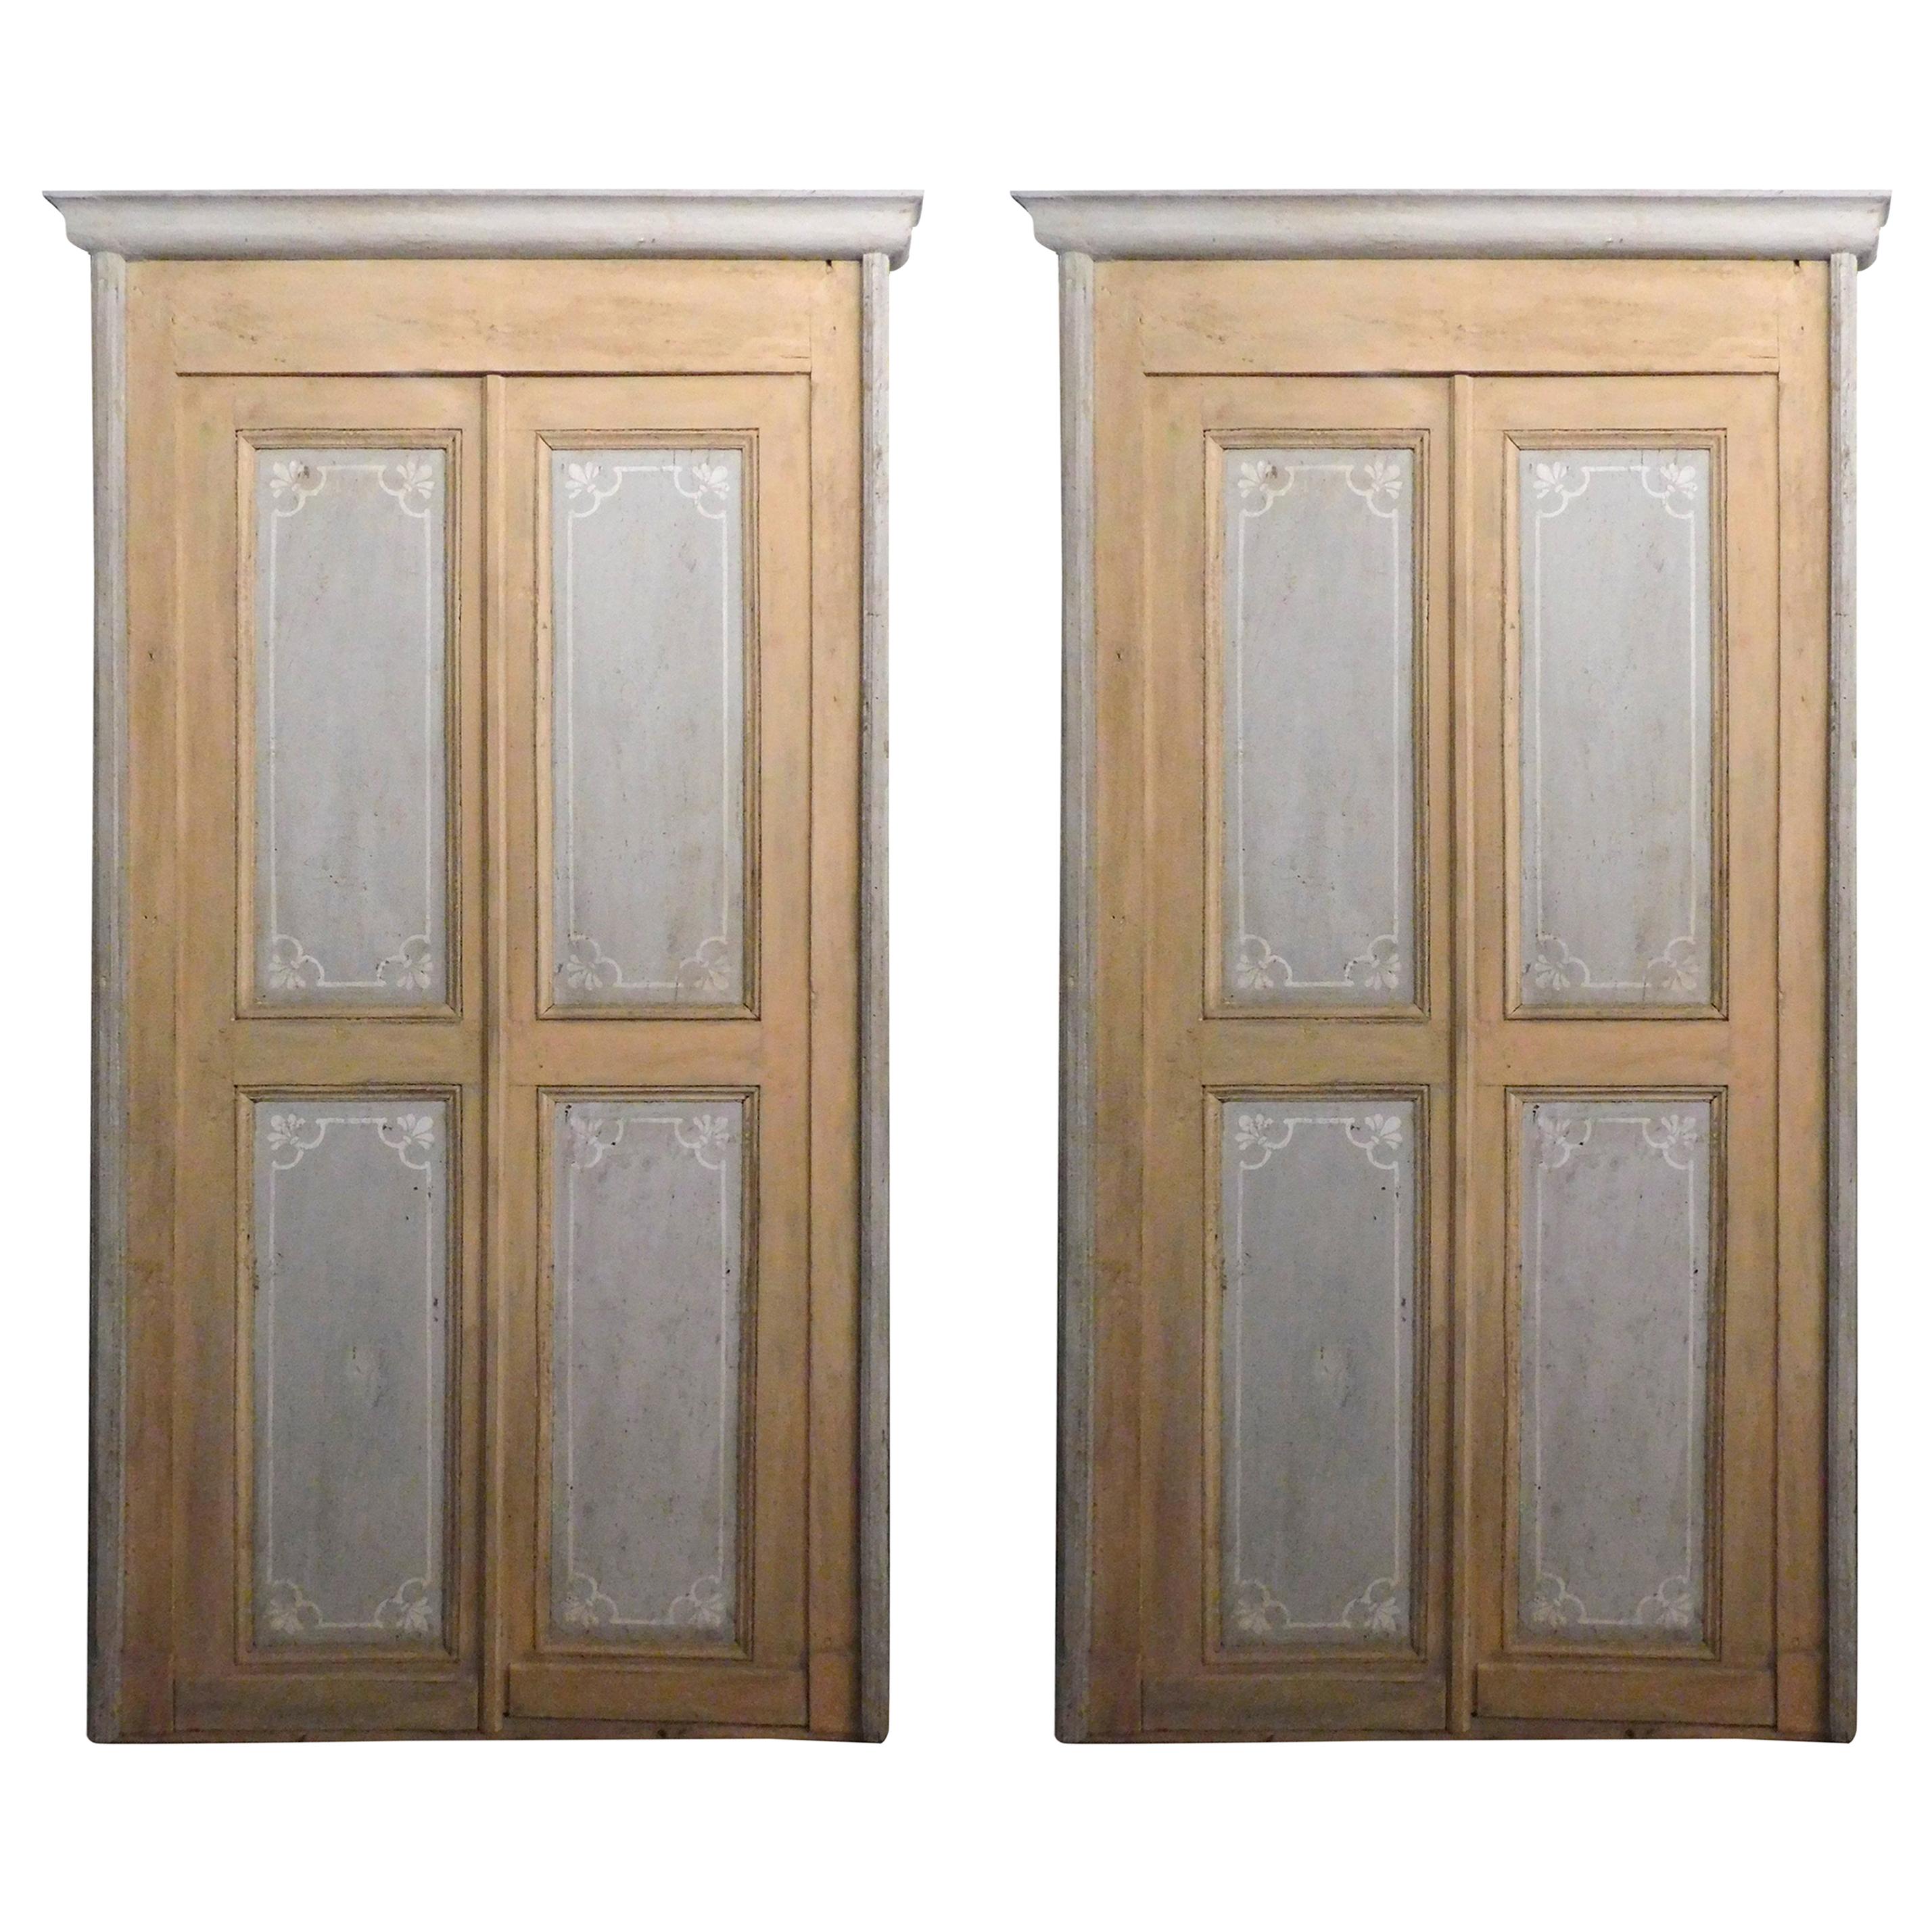 Antique Pair of Lacquered Doors with Original Frame, Gray and Beige, 1800, Italy For Sale